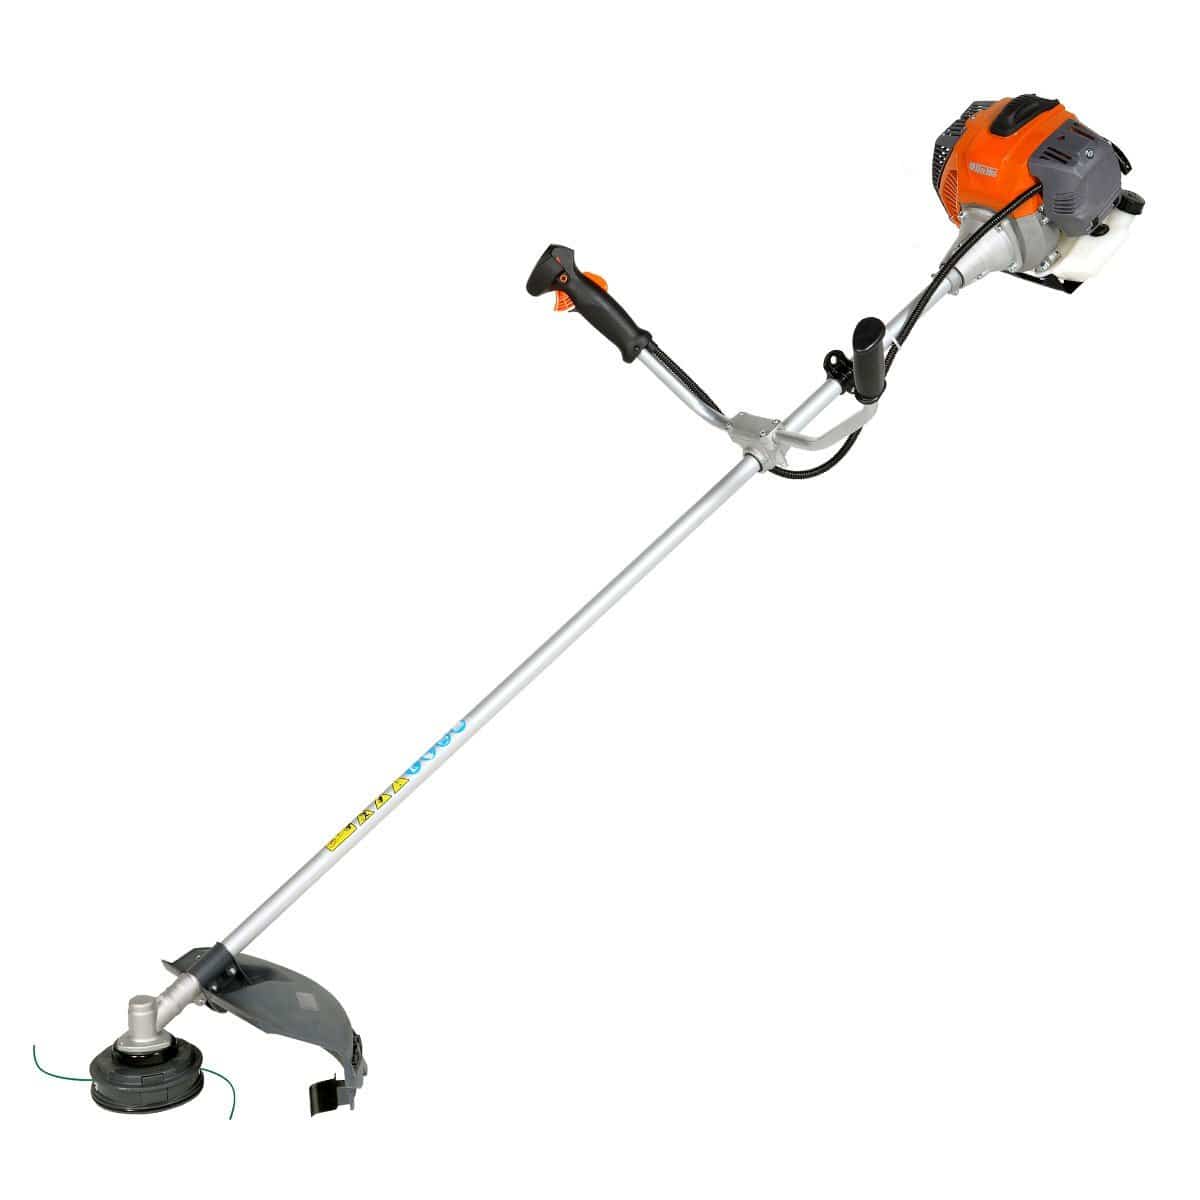 Oleo-Mac 2.1 HP Professional Brush Cutter - BCH 400T | Supply Master | Accra, Ghana Tools Building Steel Engineering Hardware tool